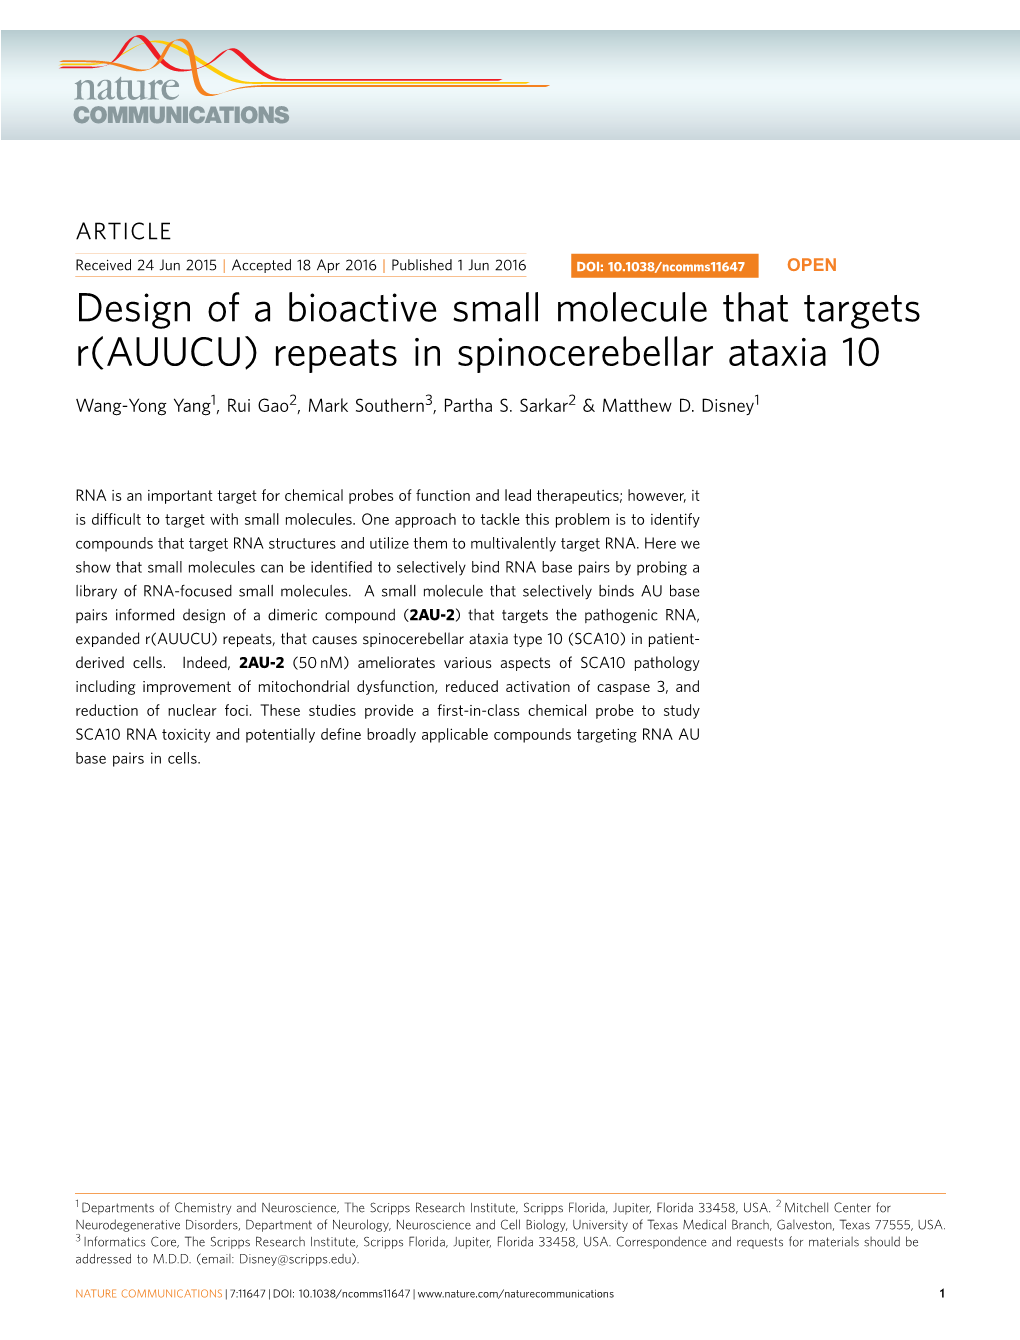 Design of a Bioactive Small Molecule That Targets R(AUUCU) Repeats in Spinocerebellar Ataxia 10